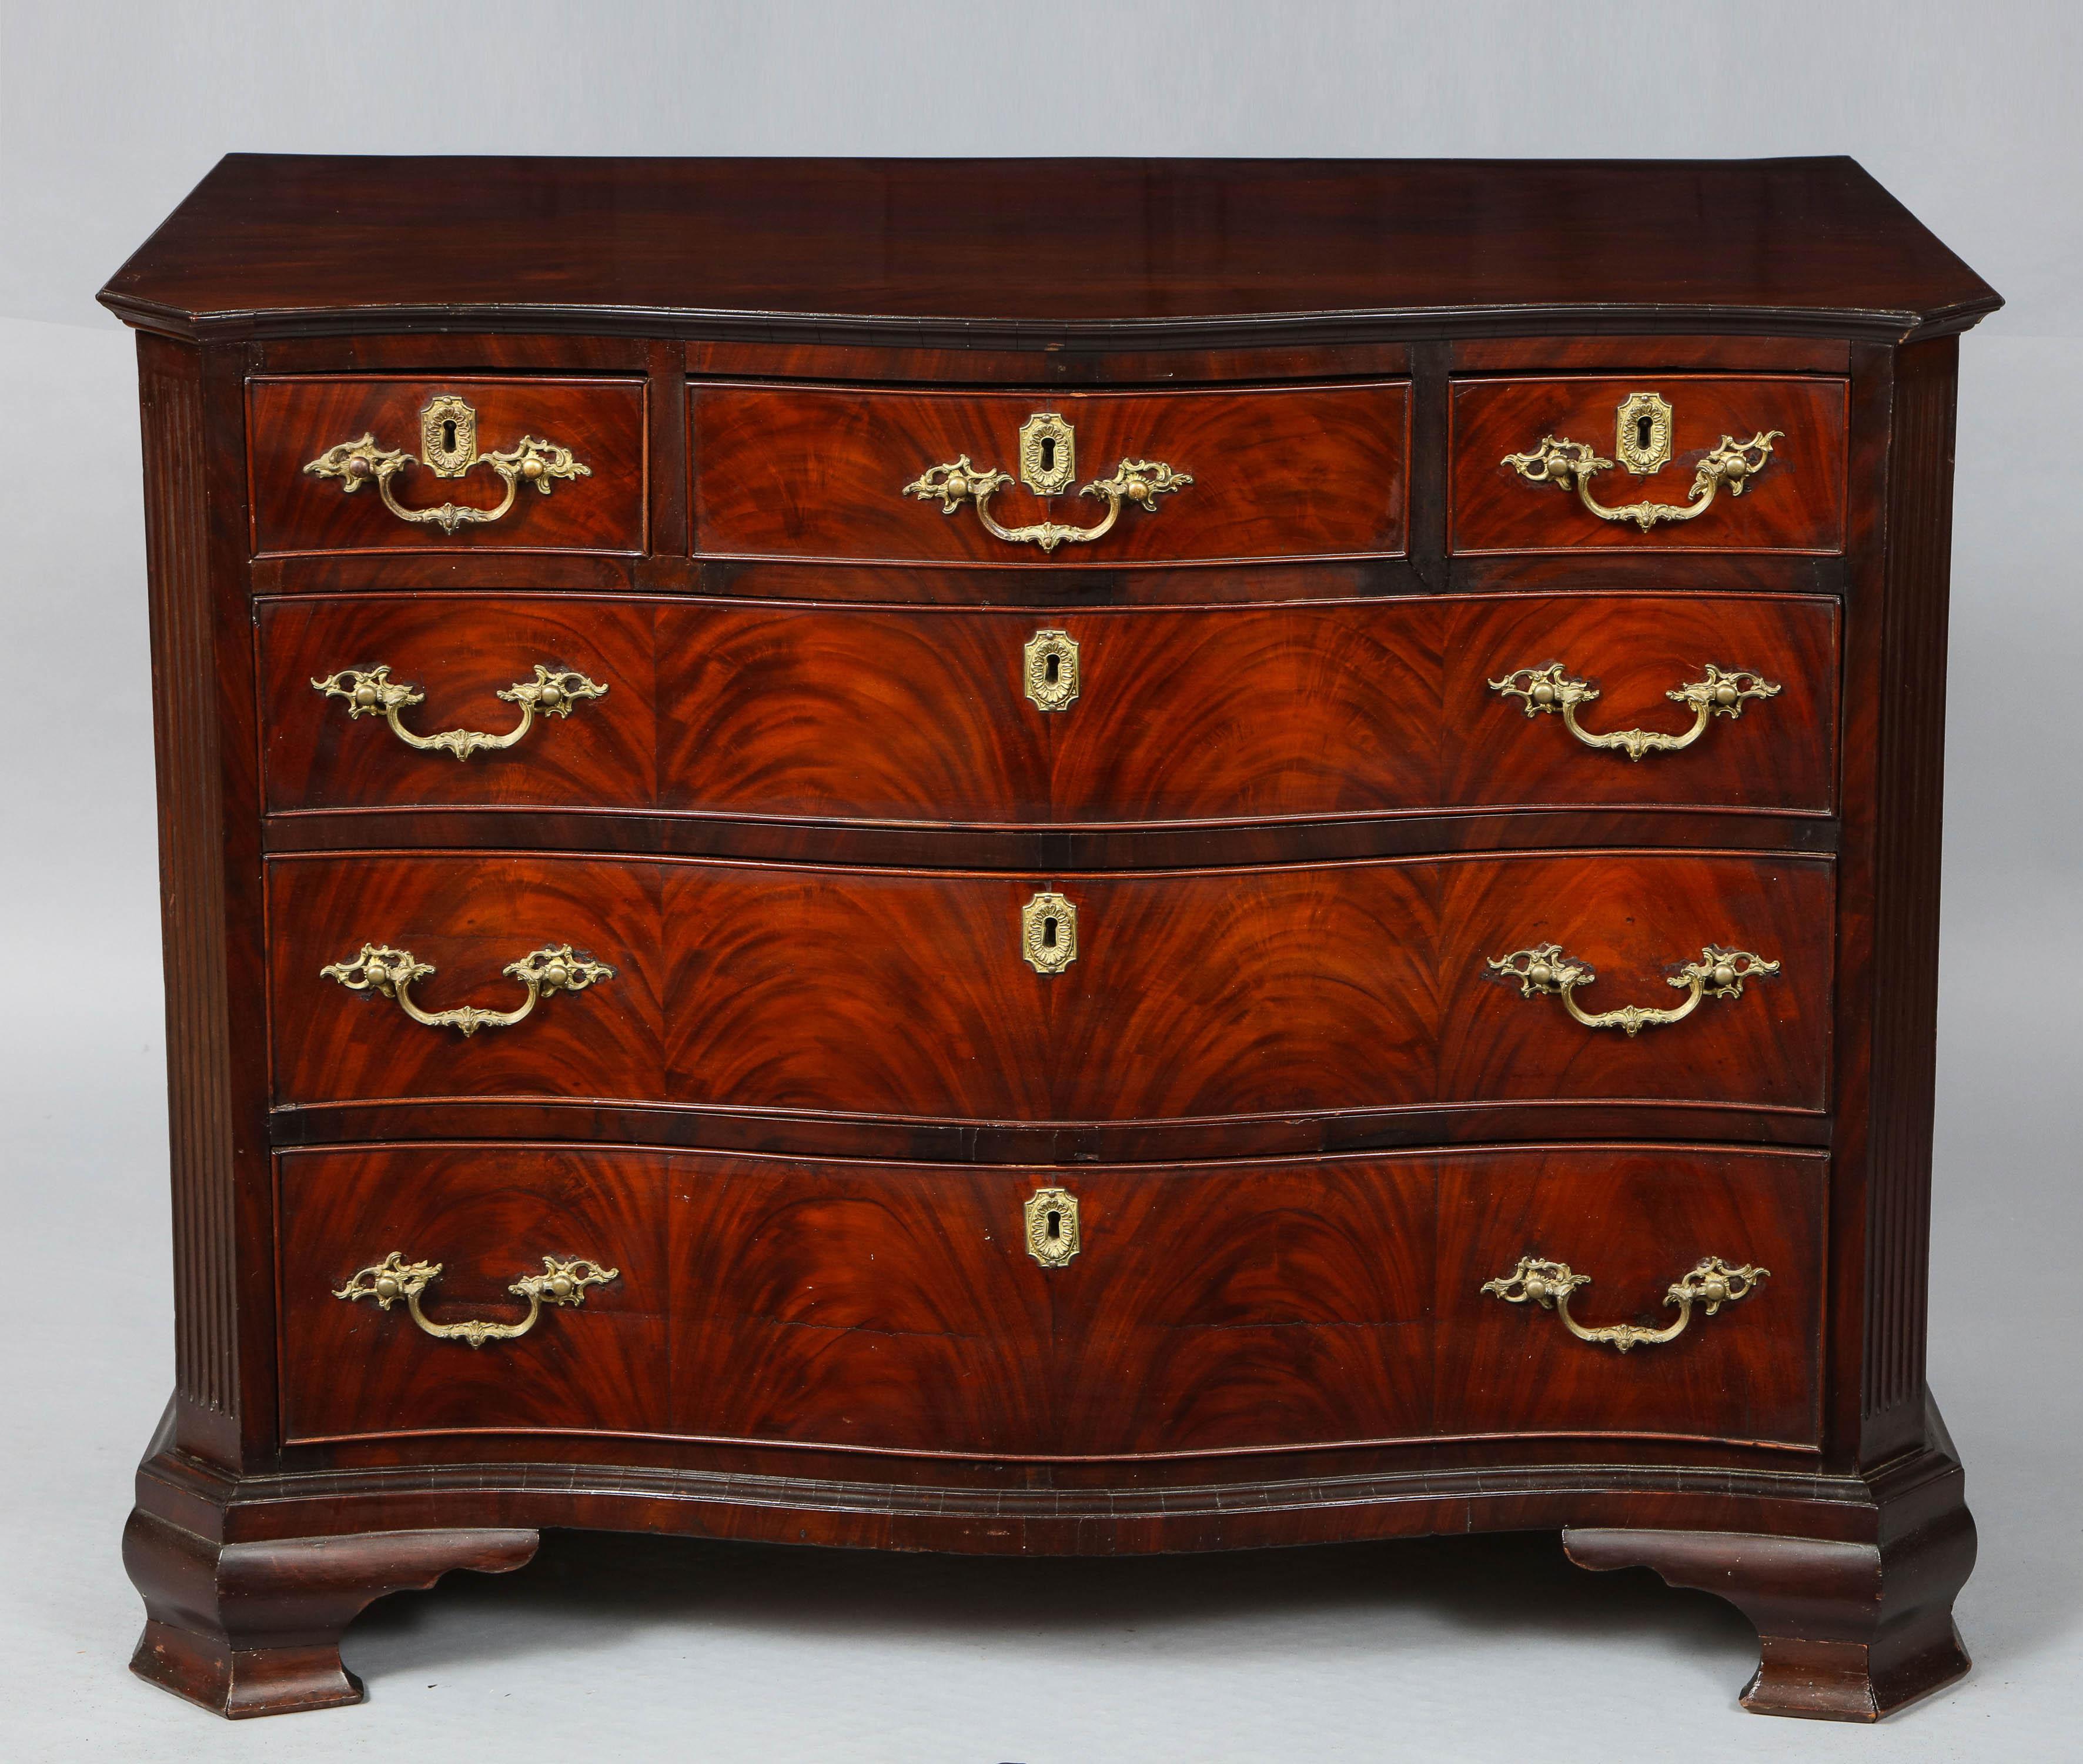 Fine 18th century English mahogany serpentine fronted chest with fluted canted corners, the well figured top with segmented under edge molding over three short drawers, the center one fitted with pullout / pull-out writing surface and side drawer,